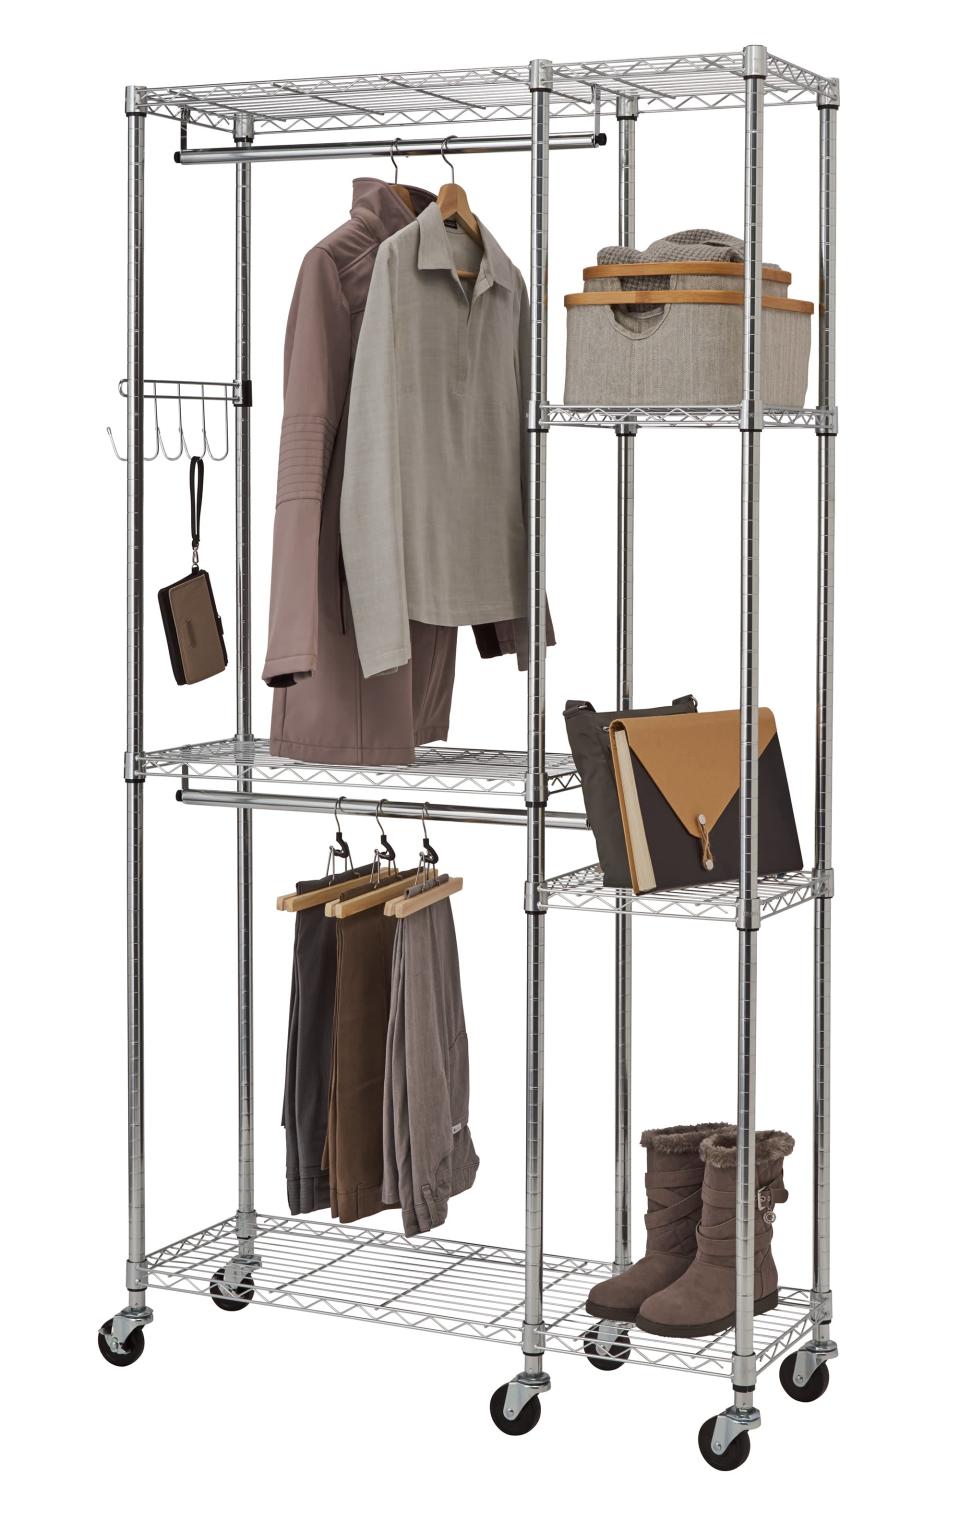 <p>The <span>TRINITY 41"W x 14"D x 76"H 5-Shelf Closet Organizer</span> ($116) is on wheels, so you can place it wherever in your home! </p>